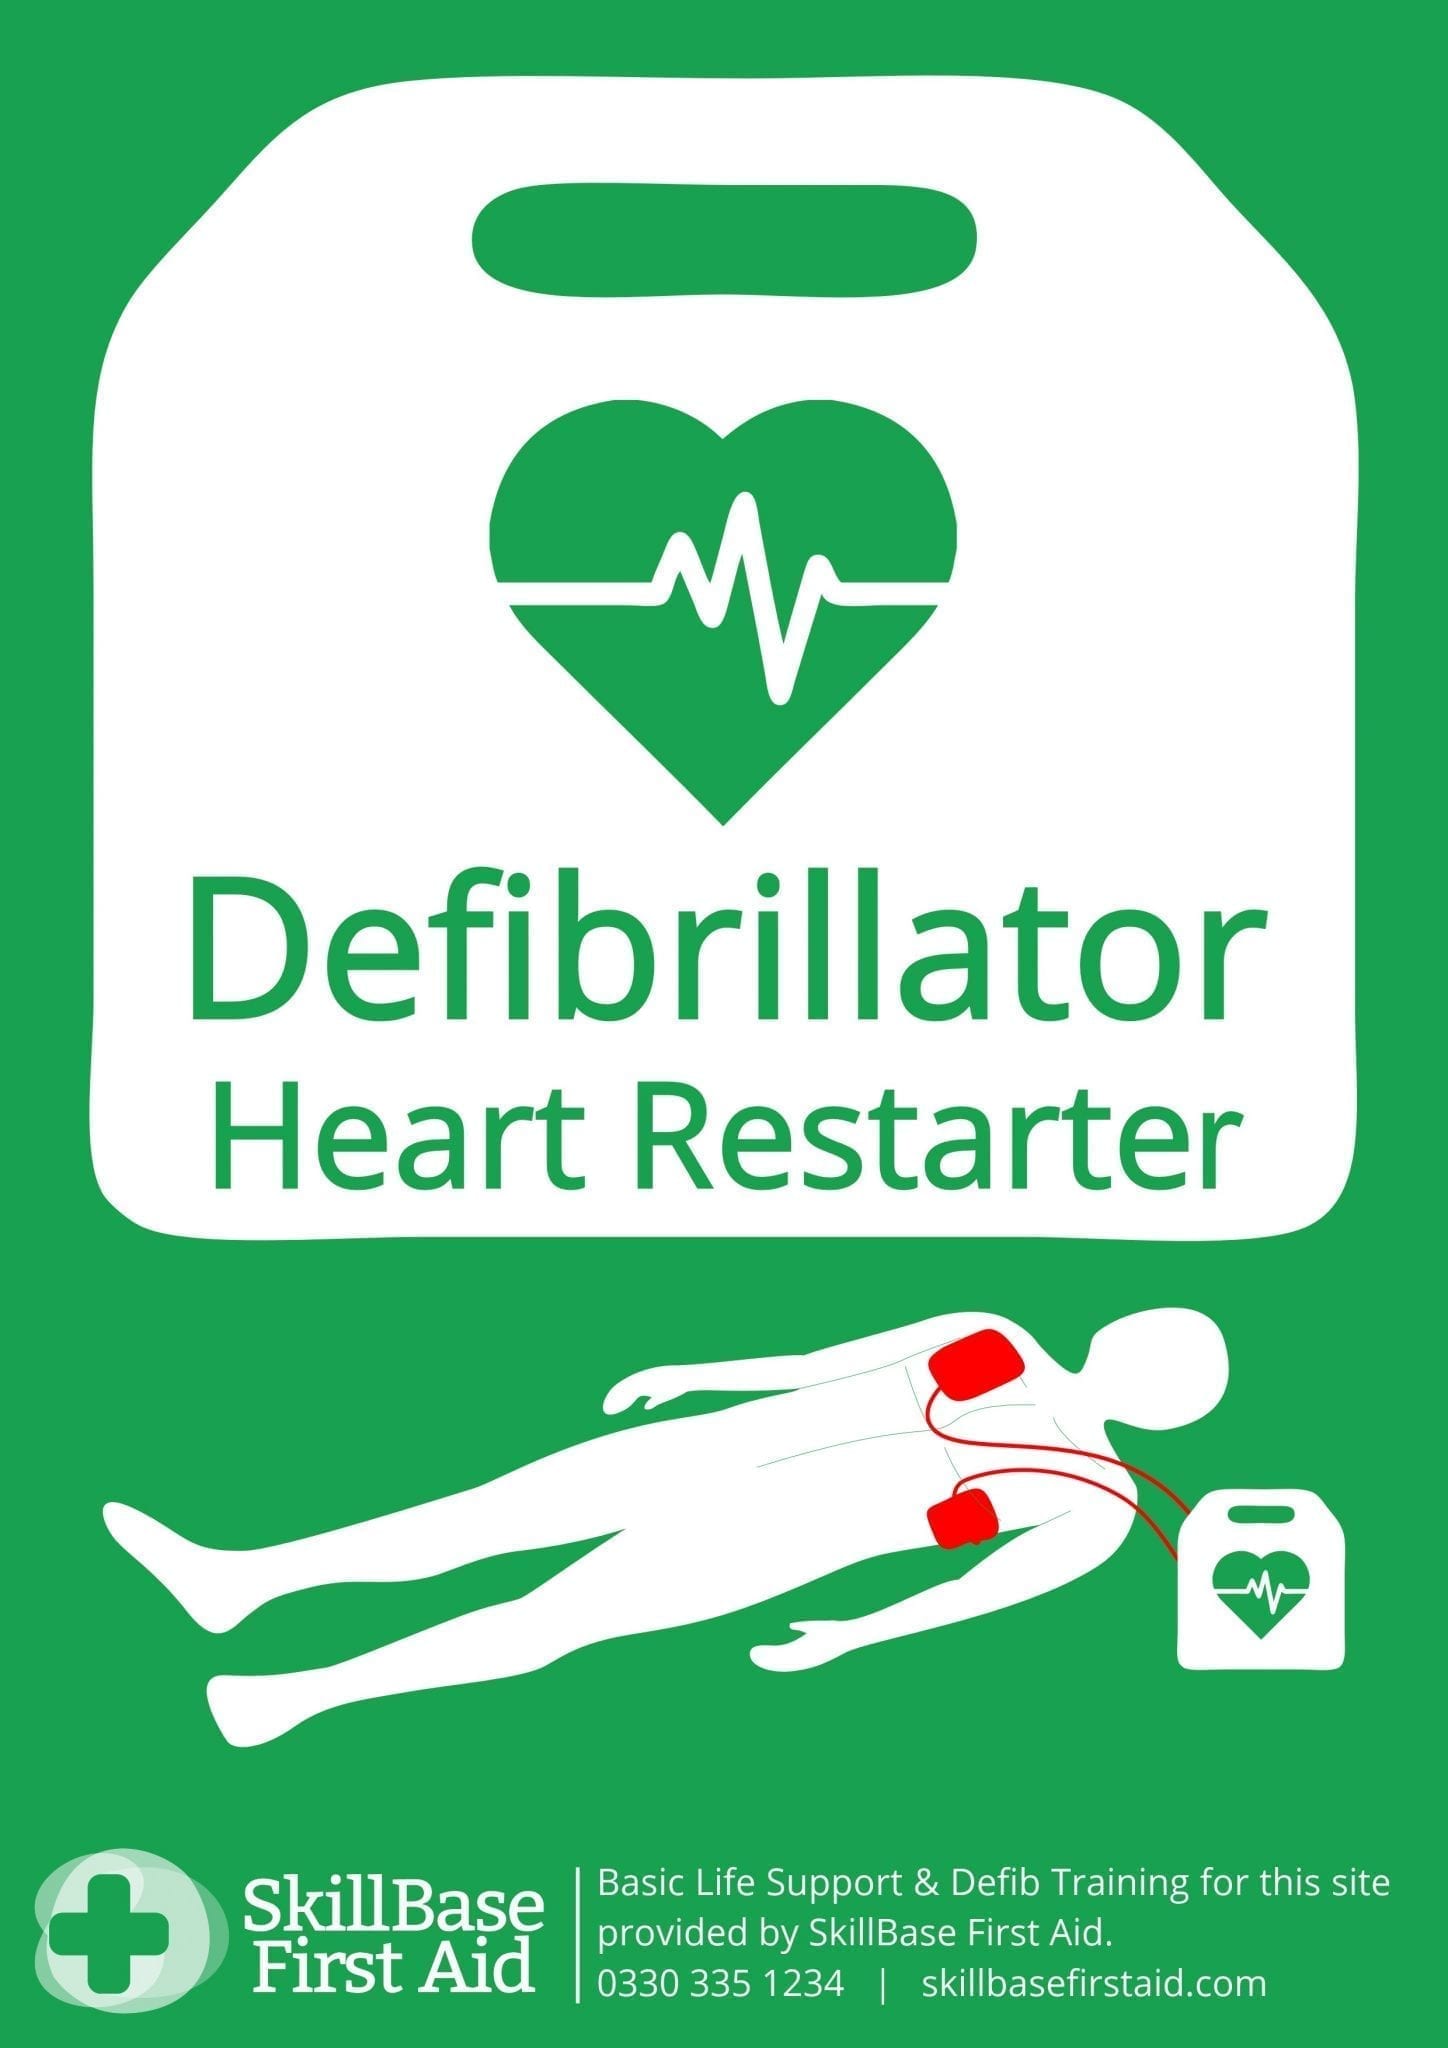 AED Standard sign uk for Defibs